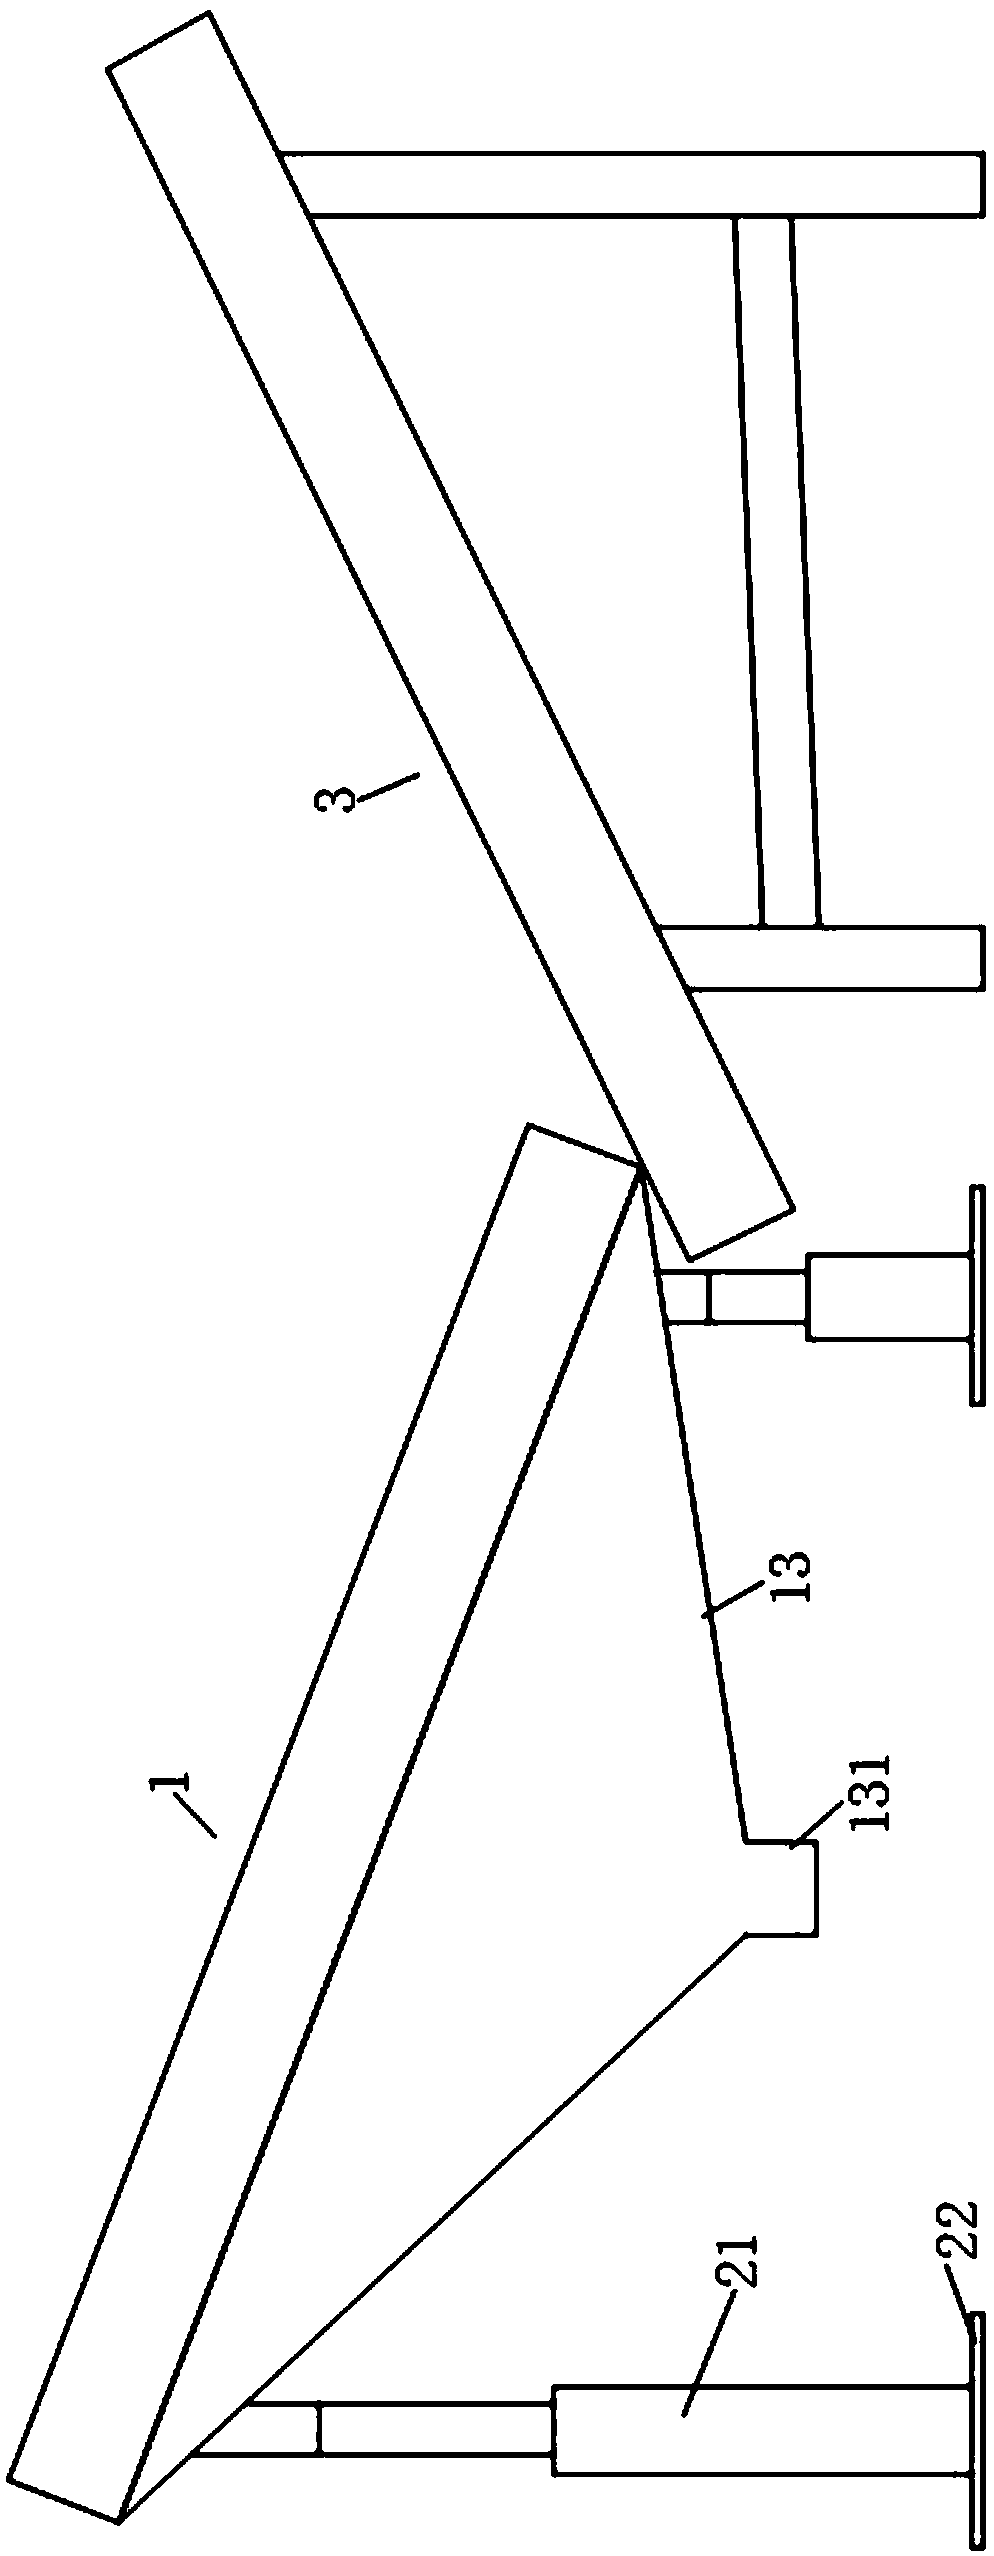 Unloading mechanism based on aquatic product carrier vehicle